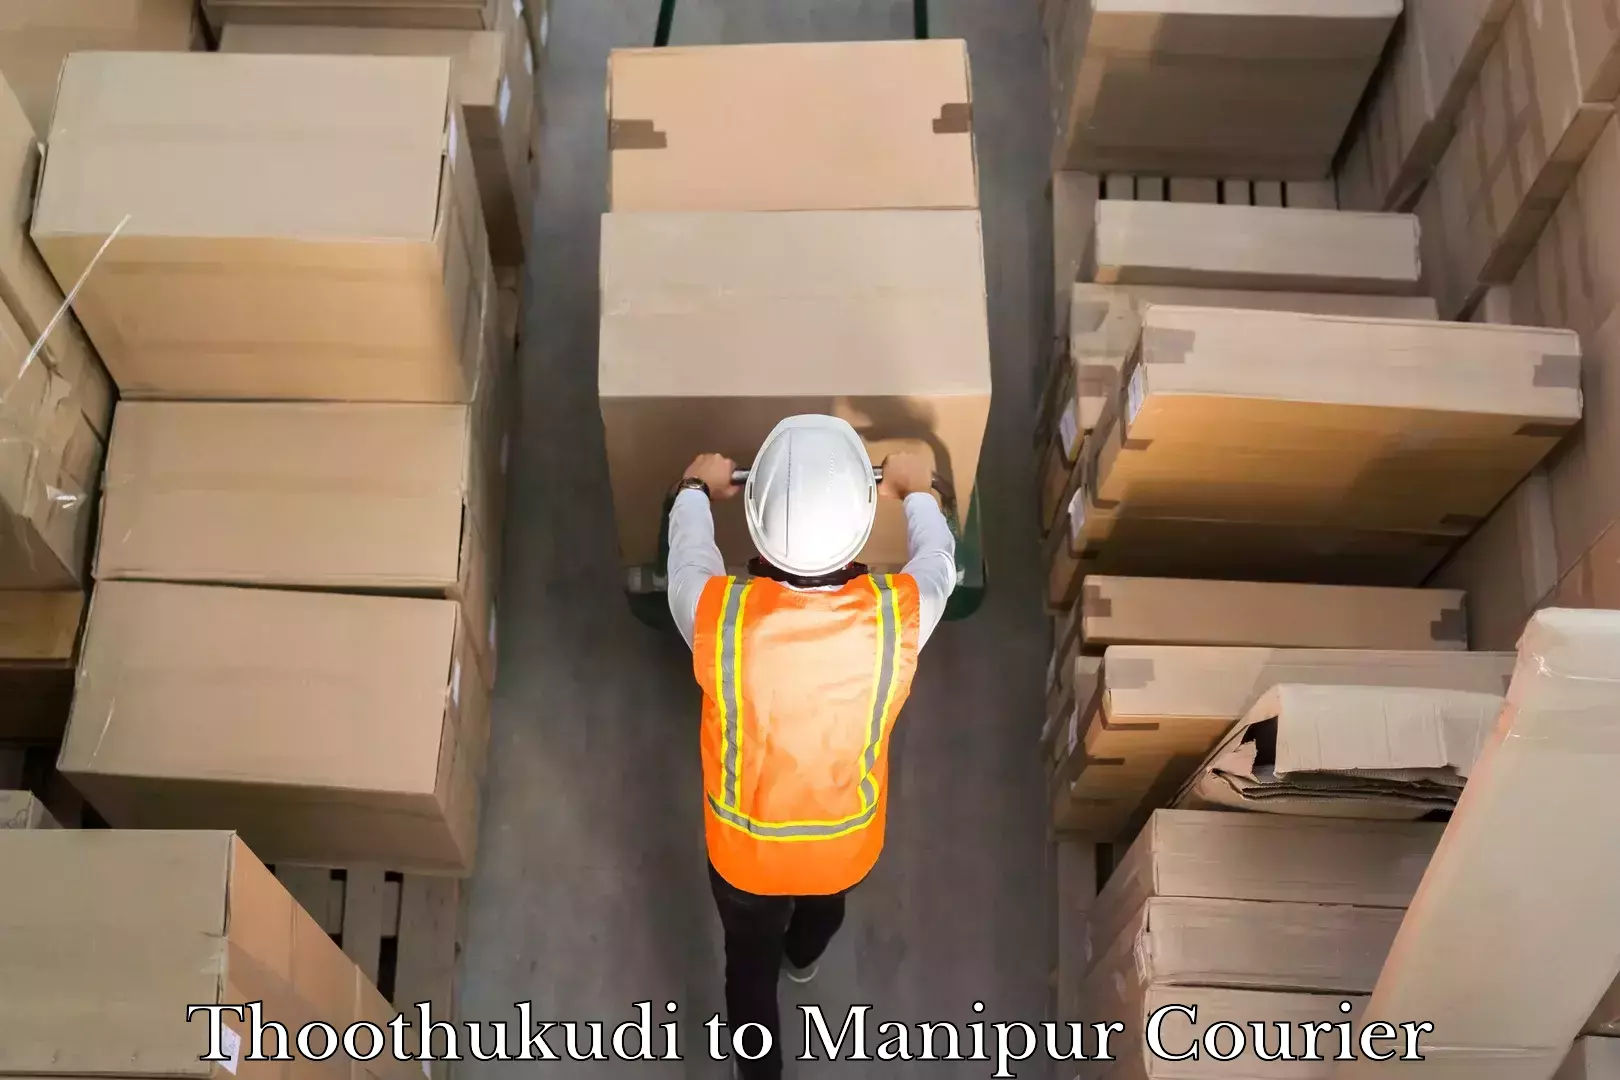 Courier service innovation Thoothukudi to Manipur